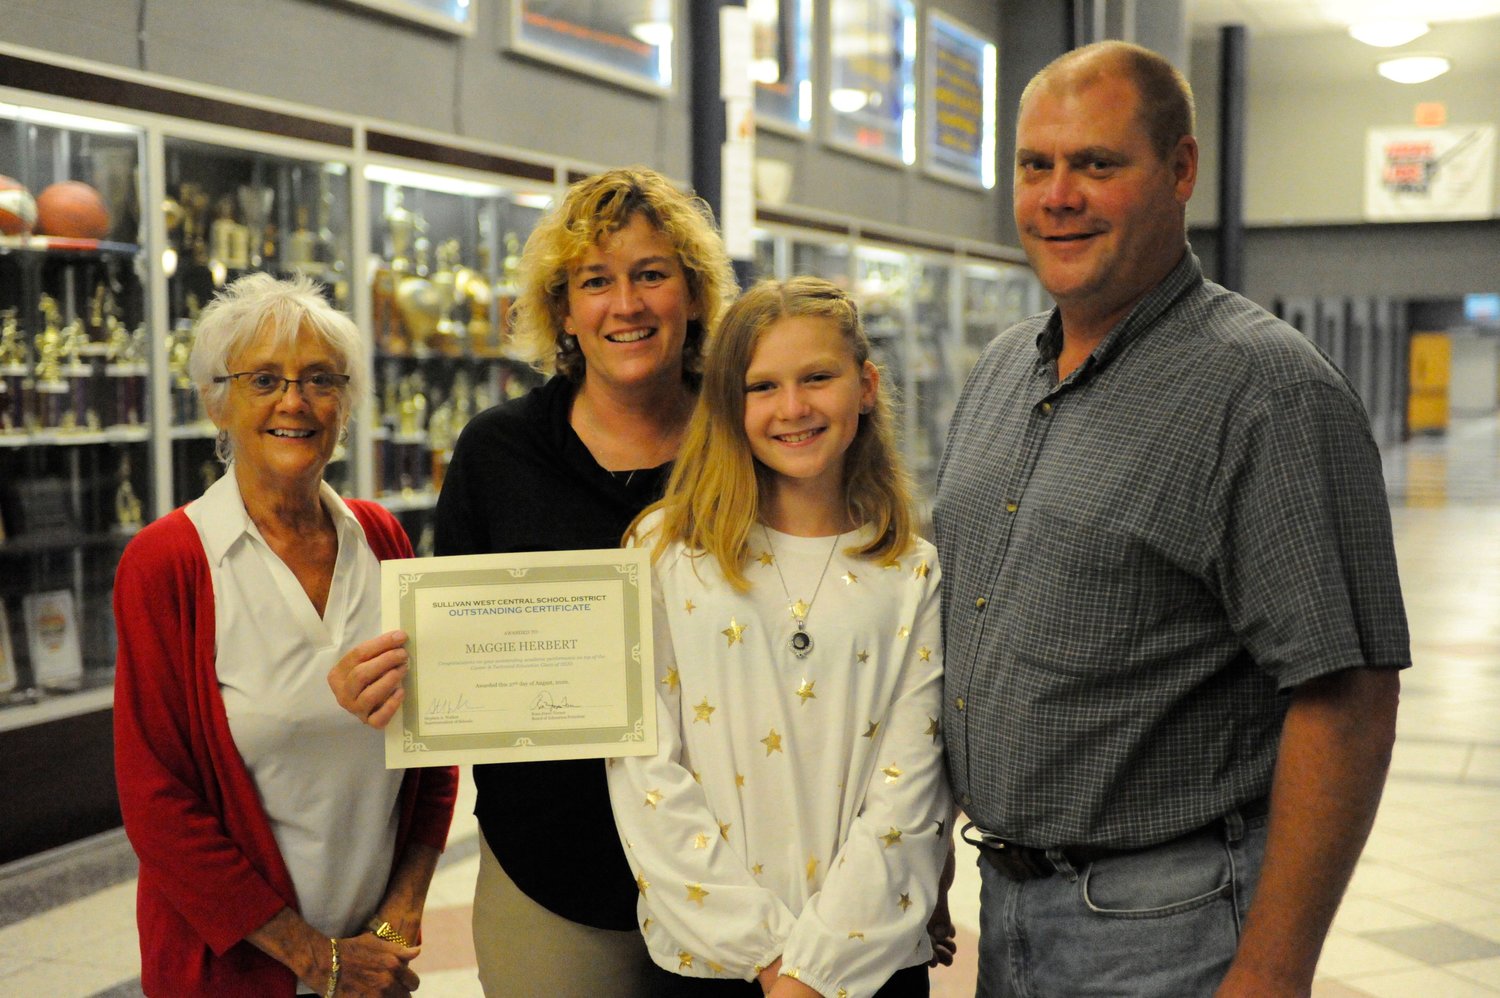 Maggie Herbert, not pictured, a Sullivan West graduate of the Class of 2020, was recognized for her “outstanding academic performance” at the Sullivan West Board of Education meeting on August 27. As she is attending SUNY Morrisville, her family accepted the certificate on her behalf: grandmother Kathy Herbert, left, mother Katie Herbert, sister Ella Herbert and father Joe Herbert.